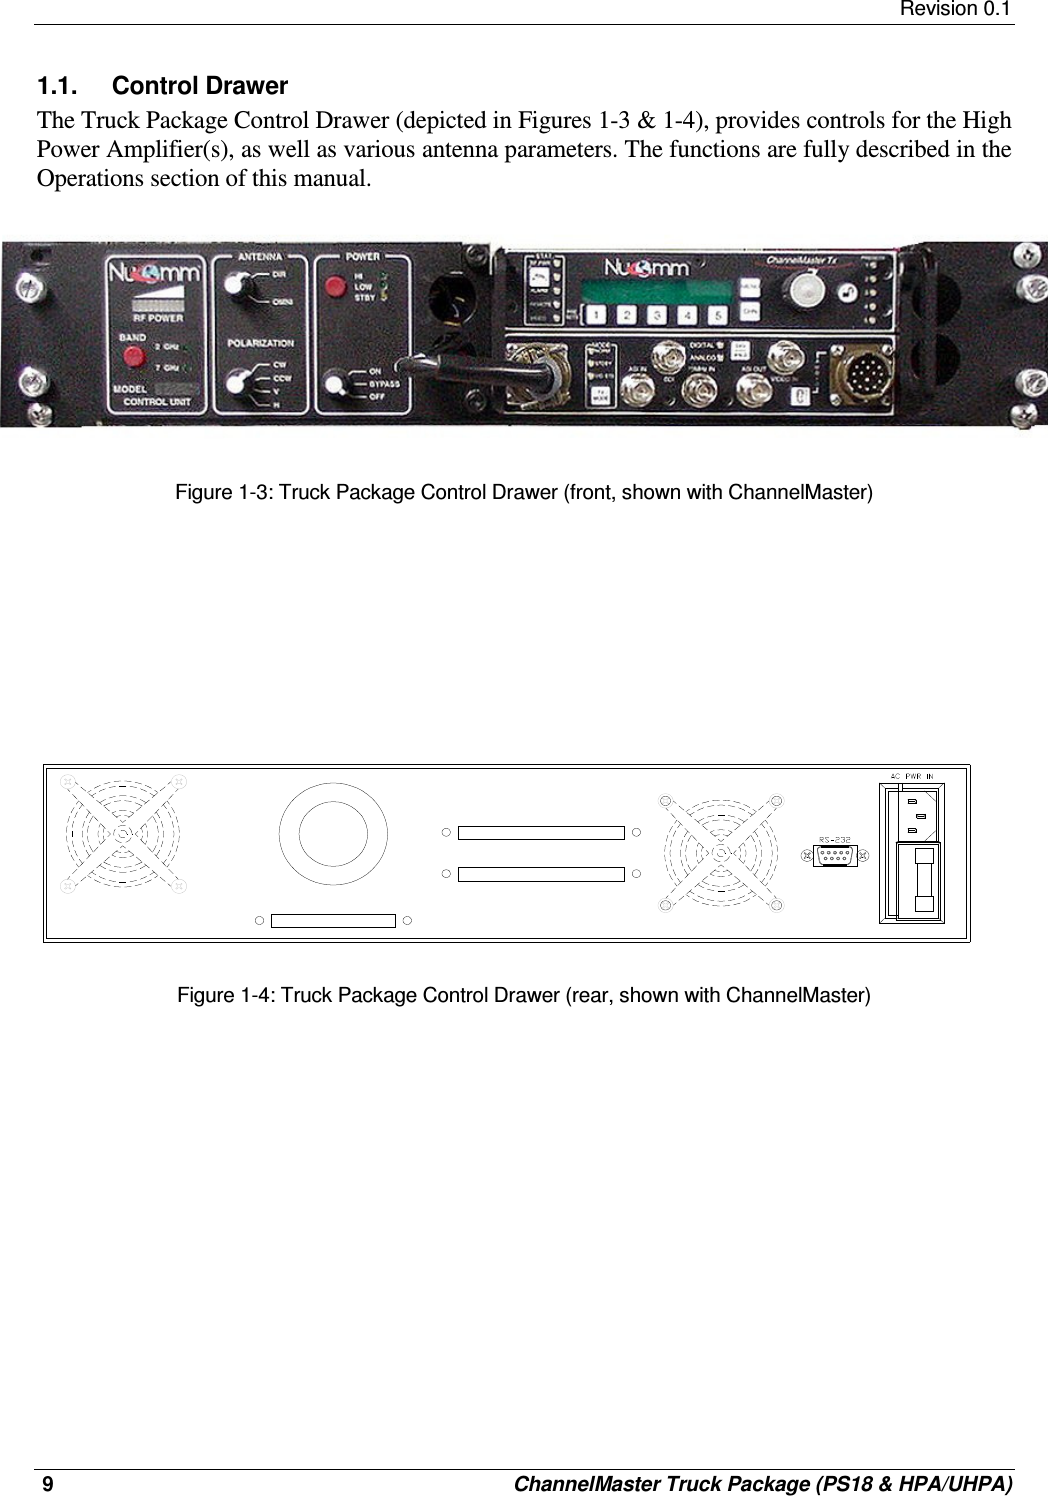     Revision 0.1  9     ChannelMaster Truck Package (PS18 &amp; HPA/UHPA) 1.1.  Control Drawer The Truck Package Control Drawer (depicted in Figures 1-3 &amp; 1-4), provides controls for the High Power Amplifier(s), as well as various antenna parameters. The functions are fully described in the Operations section of this manual.  Figure 1-3: Truck Package Control Drawer (front, shown with ChannelMaster)                     Figure 1-4: Truck Package Control Drawer (rear, shown with ChannelMaster)                  